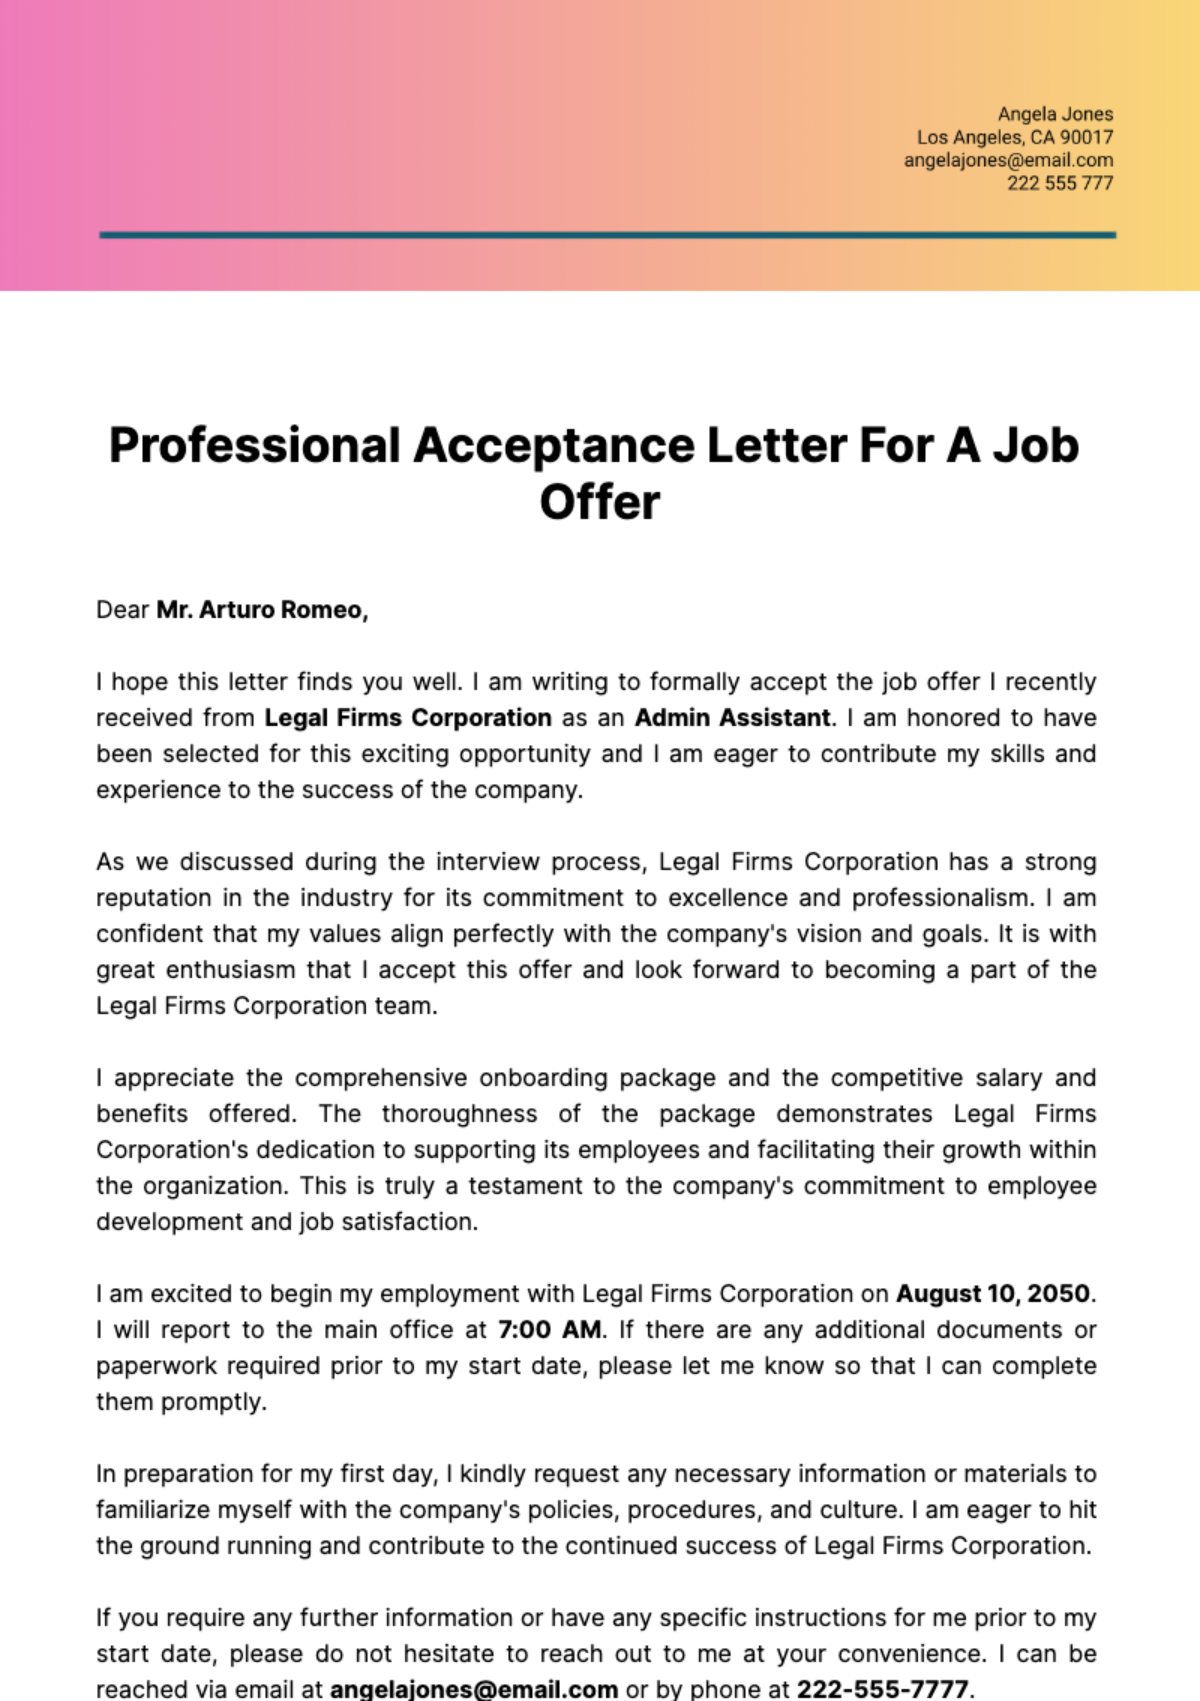 Professional Acceptance Letter for a Job Offer Template